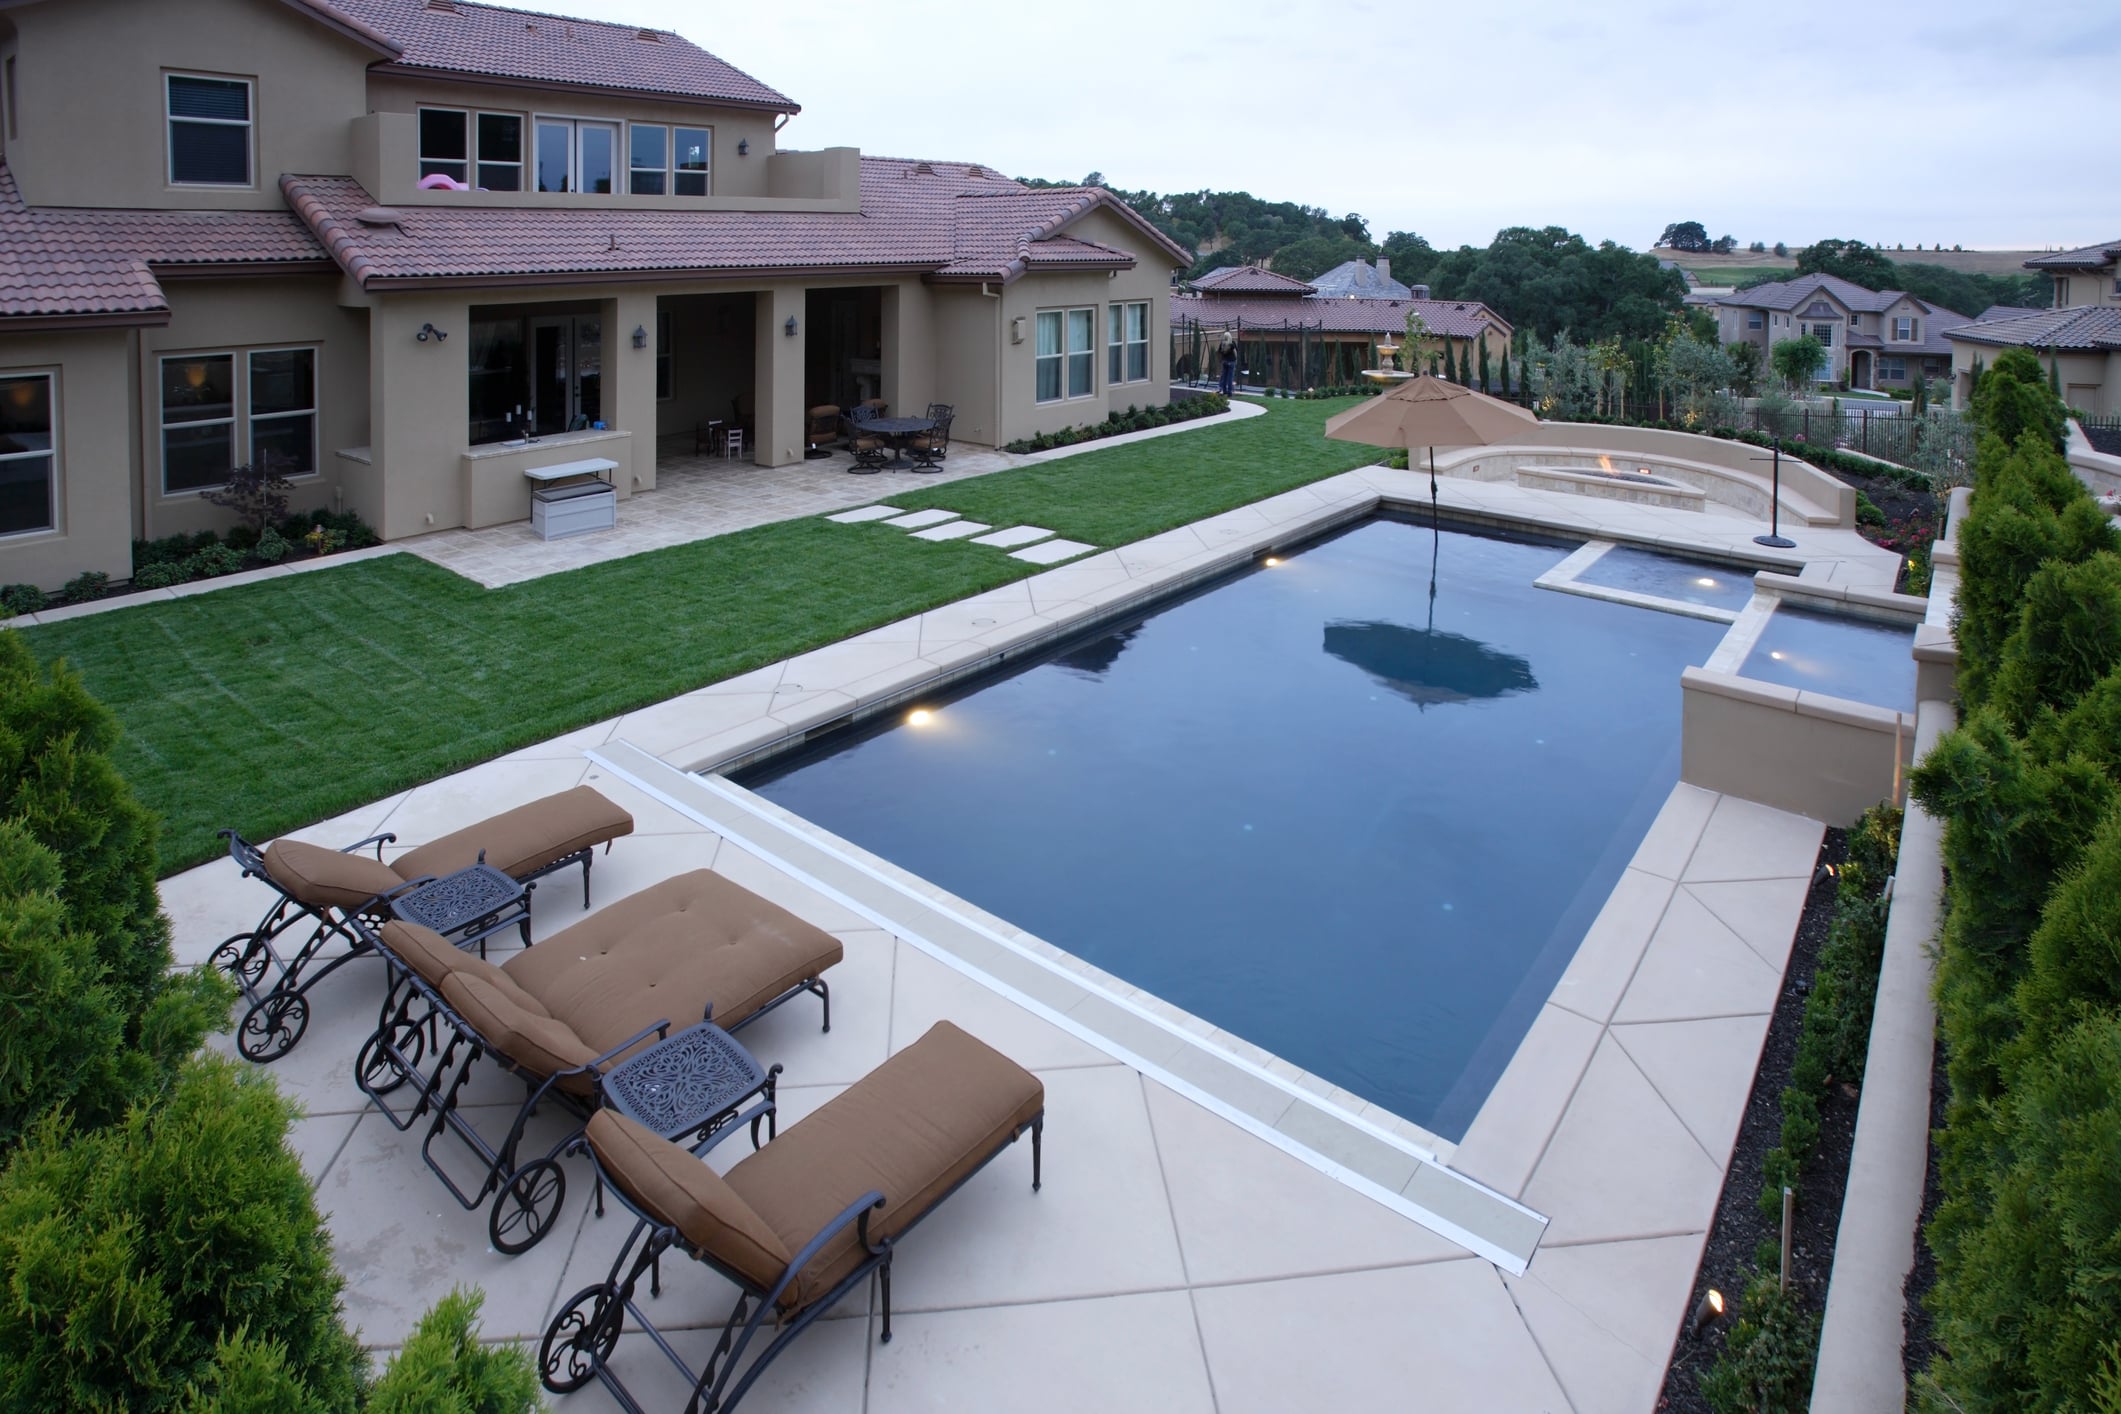 8 Tips for Making Your Pool More Energy Efficient